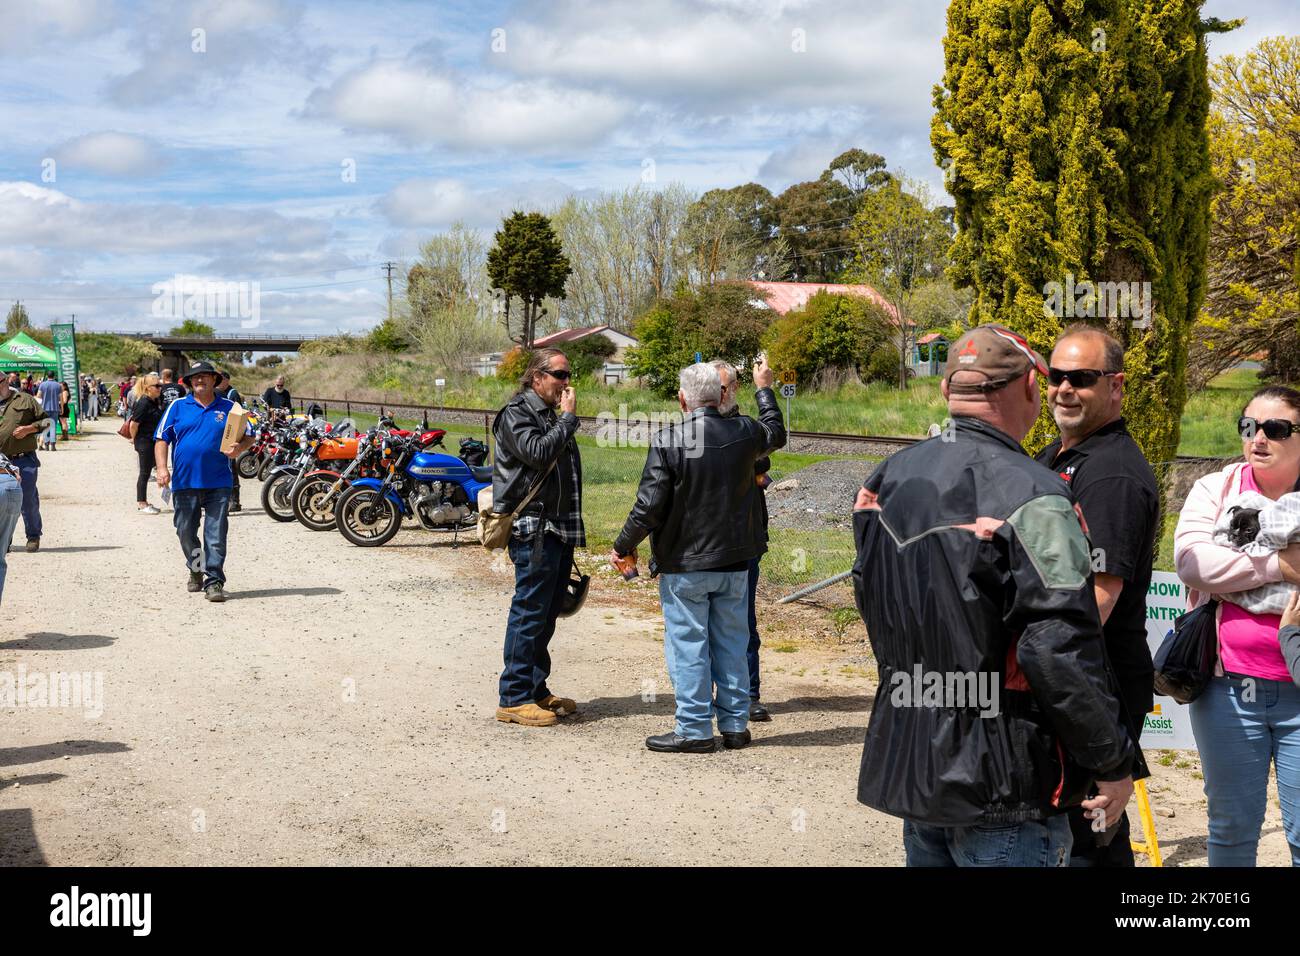 Orange motorcycle club for classic and cafe racer bikes assemble in Millthorpe village, a heritage town village, New South Wales,Australia,spring day Stock Photo